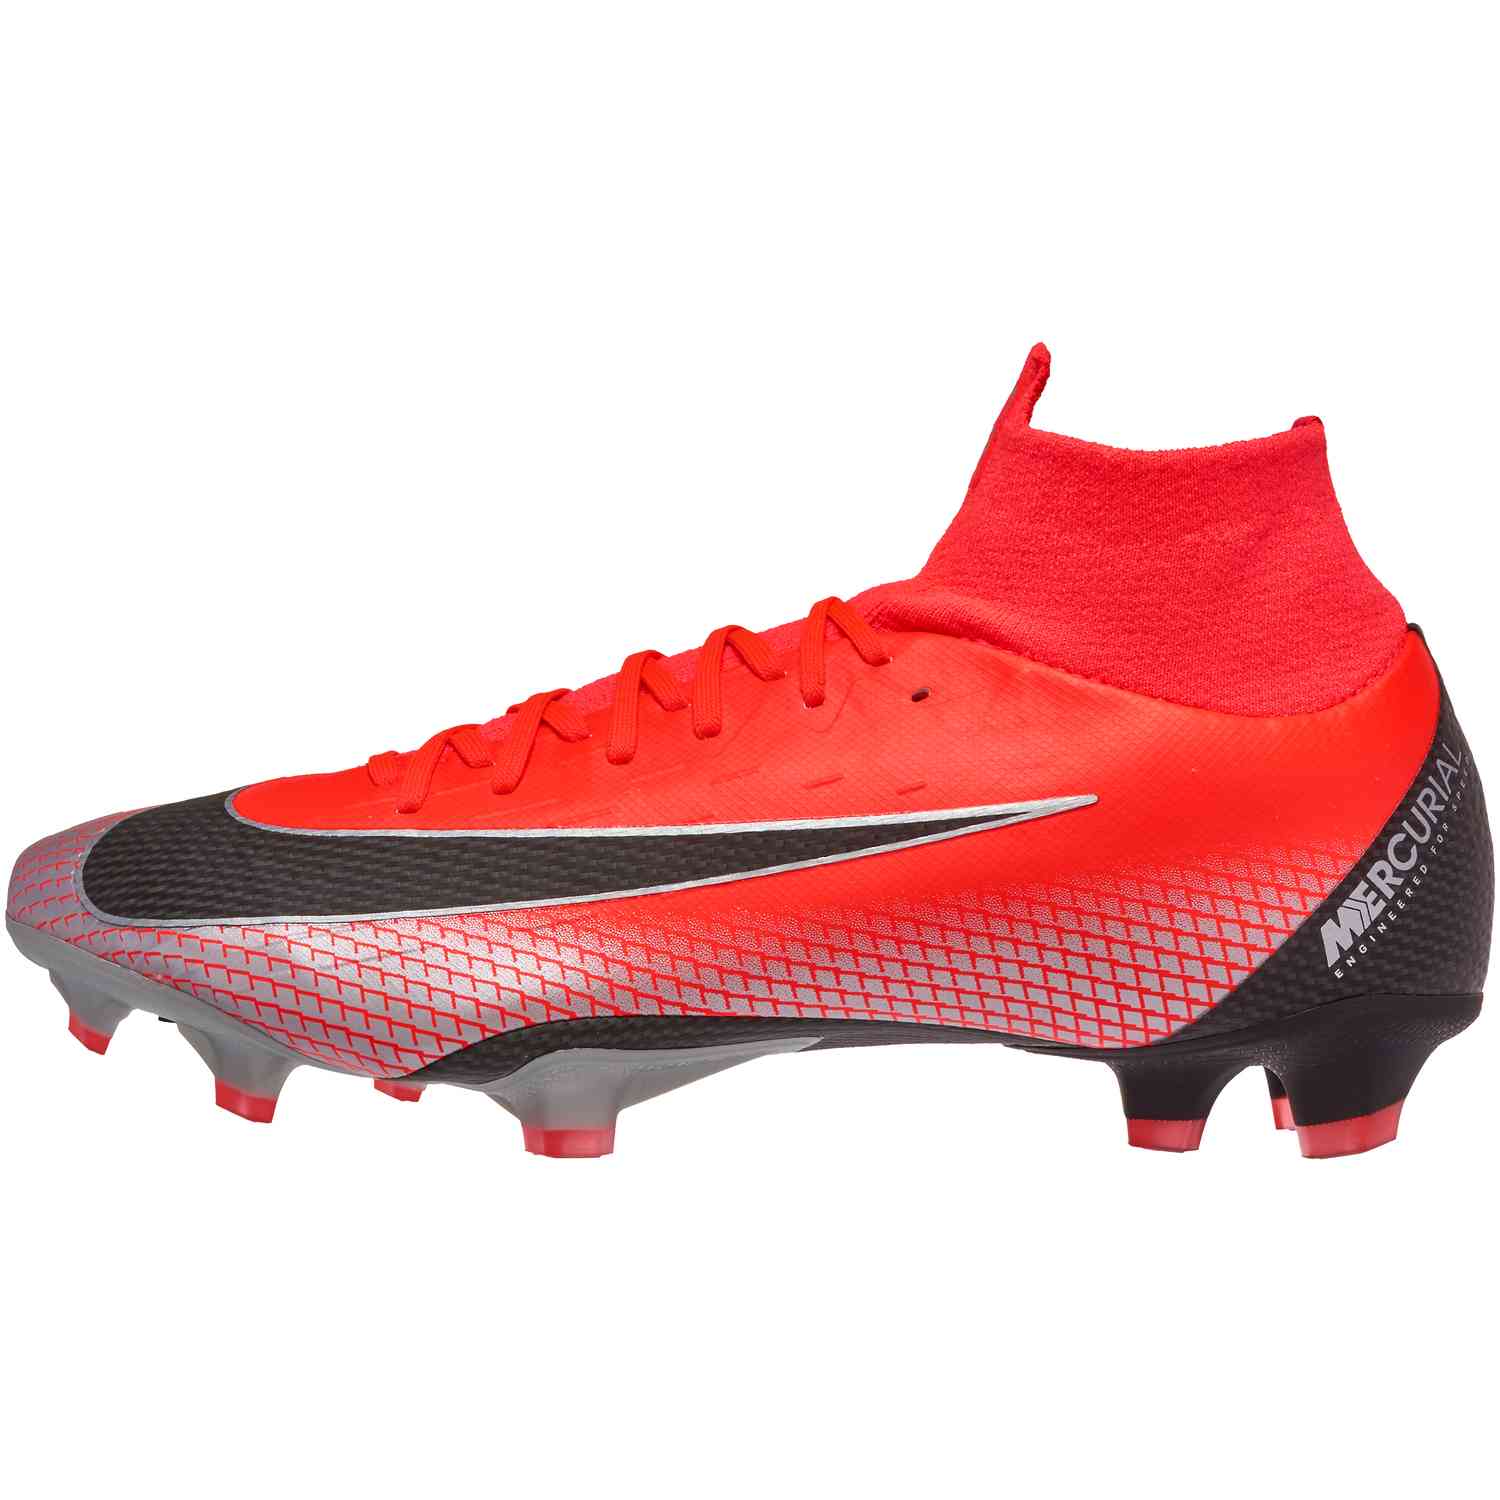 Nike Mercurial Superfly VI Pro CR7 AG PRO Artificial Grass